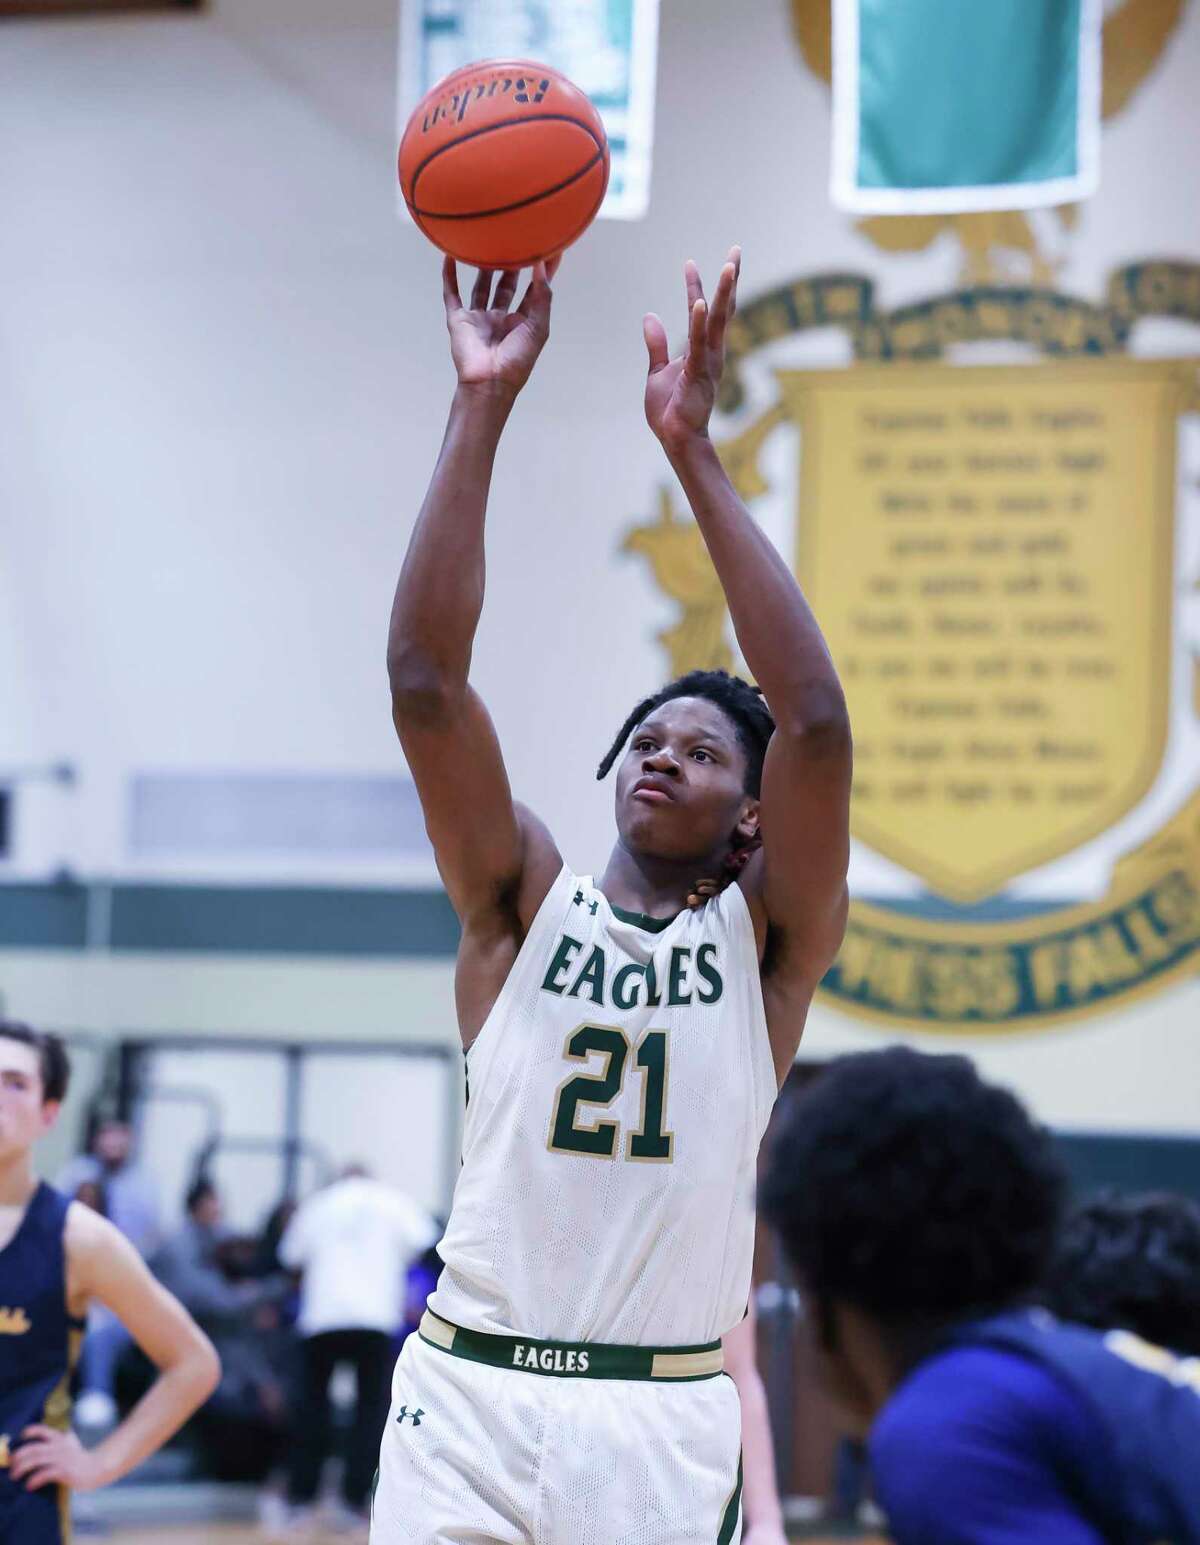 Cy Falls Joseph Tugler (21) shoots a free-throw in the second half of a District 16-6A boys high school basketball game between the Cypress Falls Eagles and the Cypress Ranch Mustangs at Cypress Falls High School in Houston, TX on Friday, January 13, 2023. Cy Falls beat Cy Ranch 50-30.